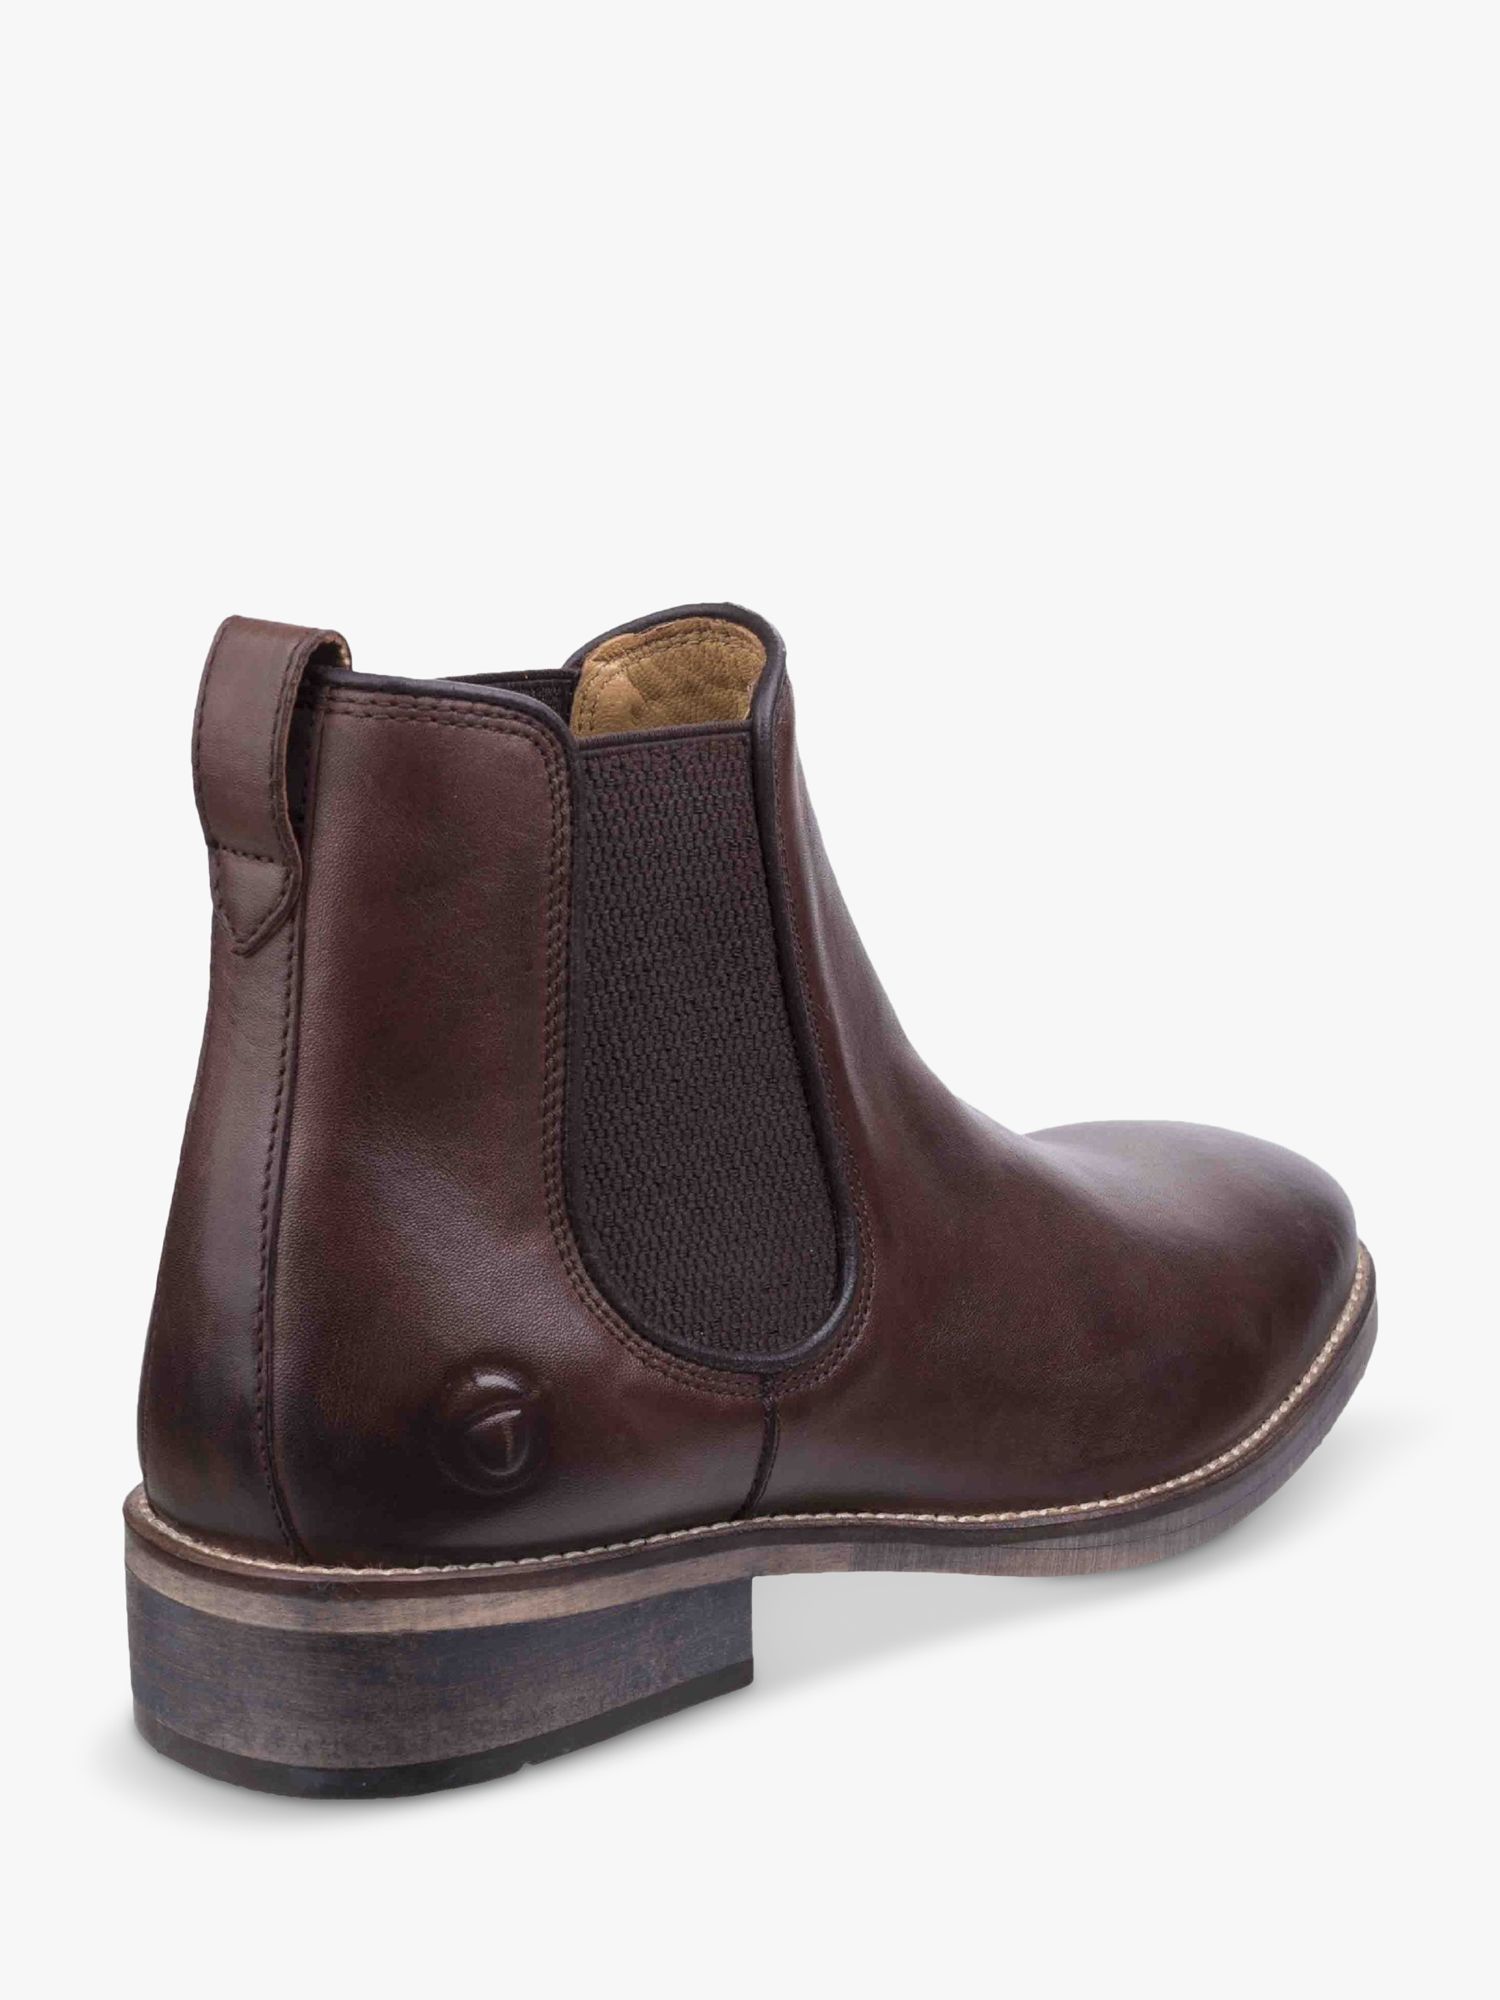 Cotswold Corsham Leather Chelsea Boots, Dark Brown at John Lewis & Partners